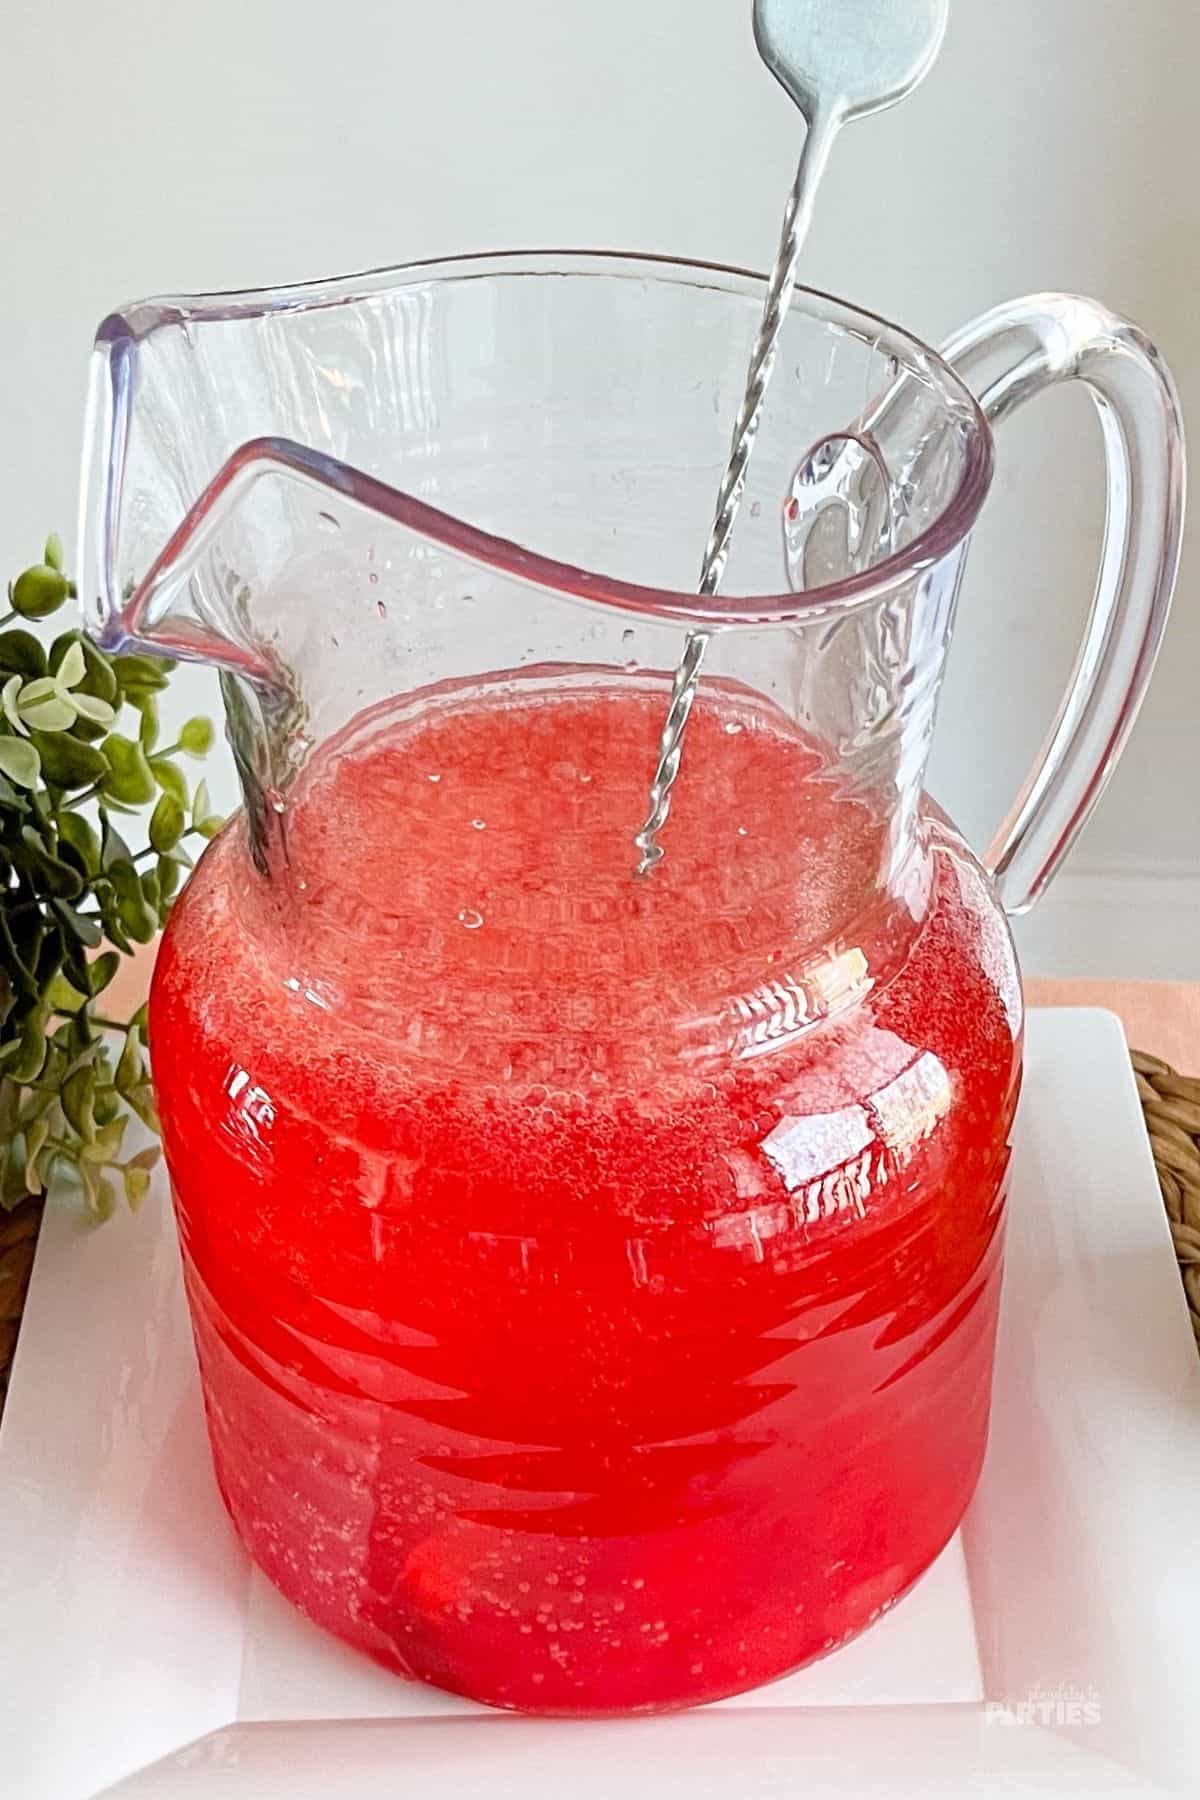 A pitcher with red cherry punch.